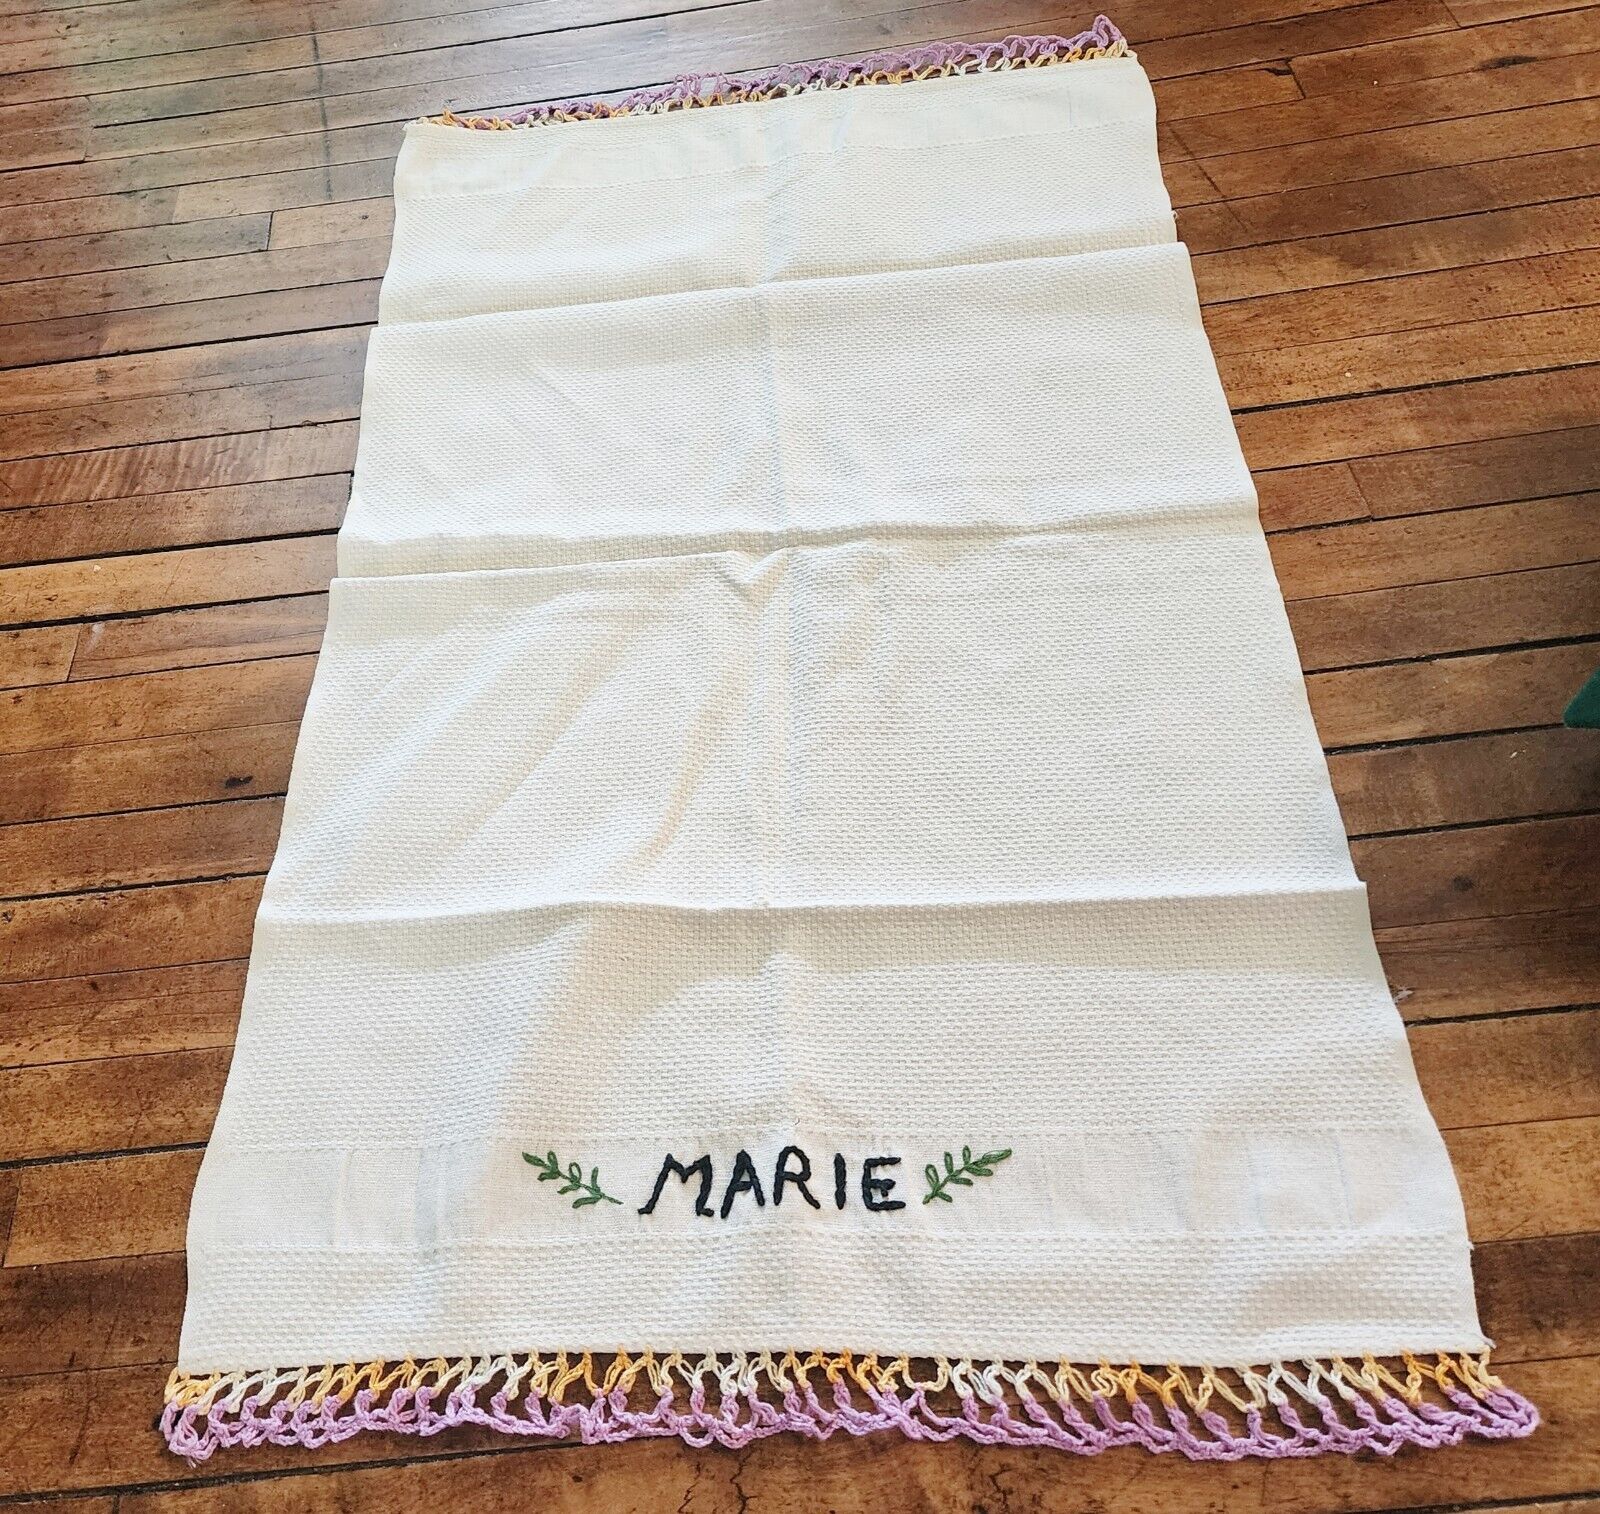 Vth Estate Kitchen Tea Towel 17x32 Inch w Crocheted Ends and MARIE Embroidered